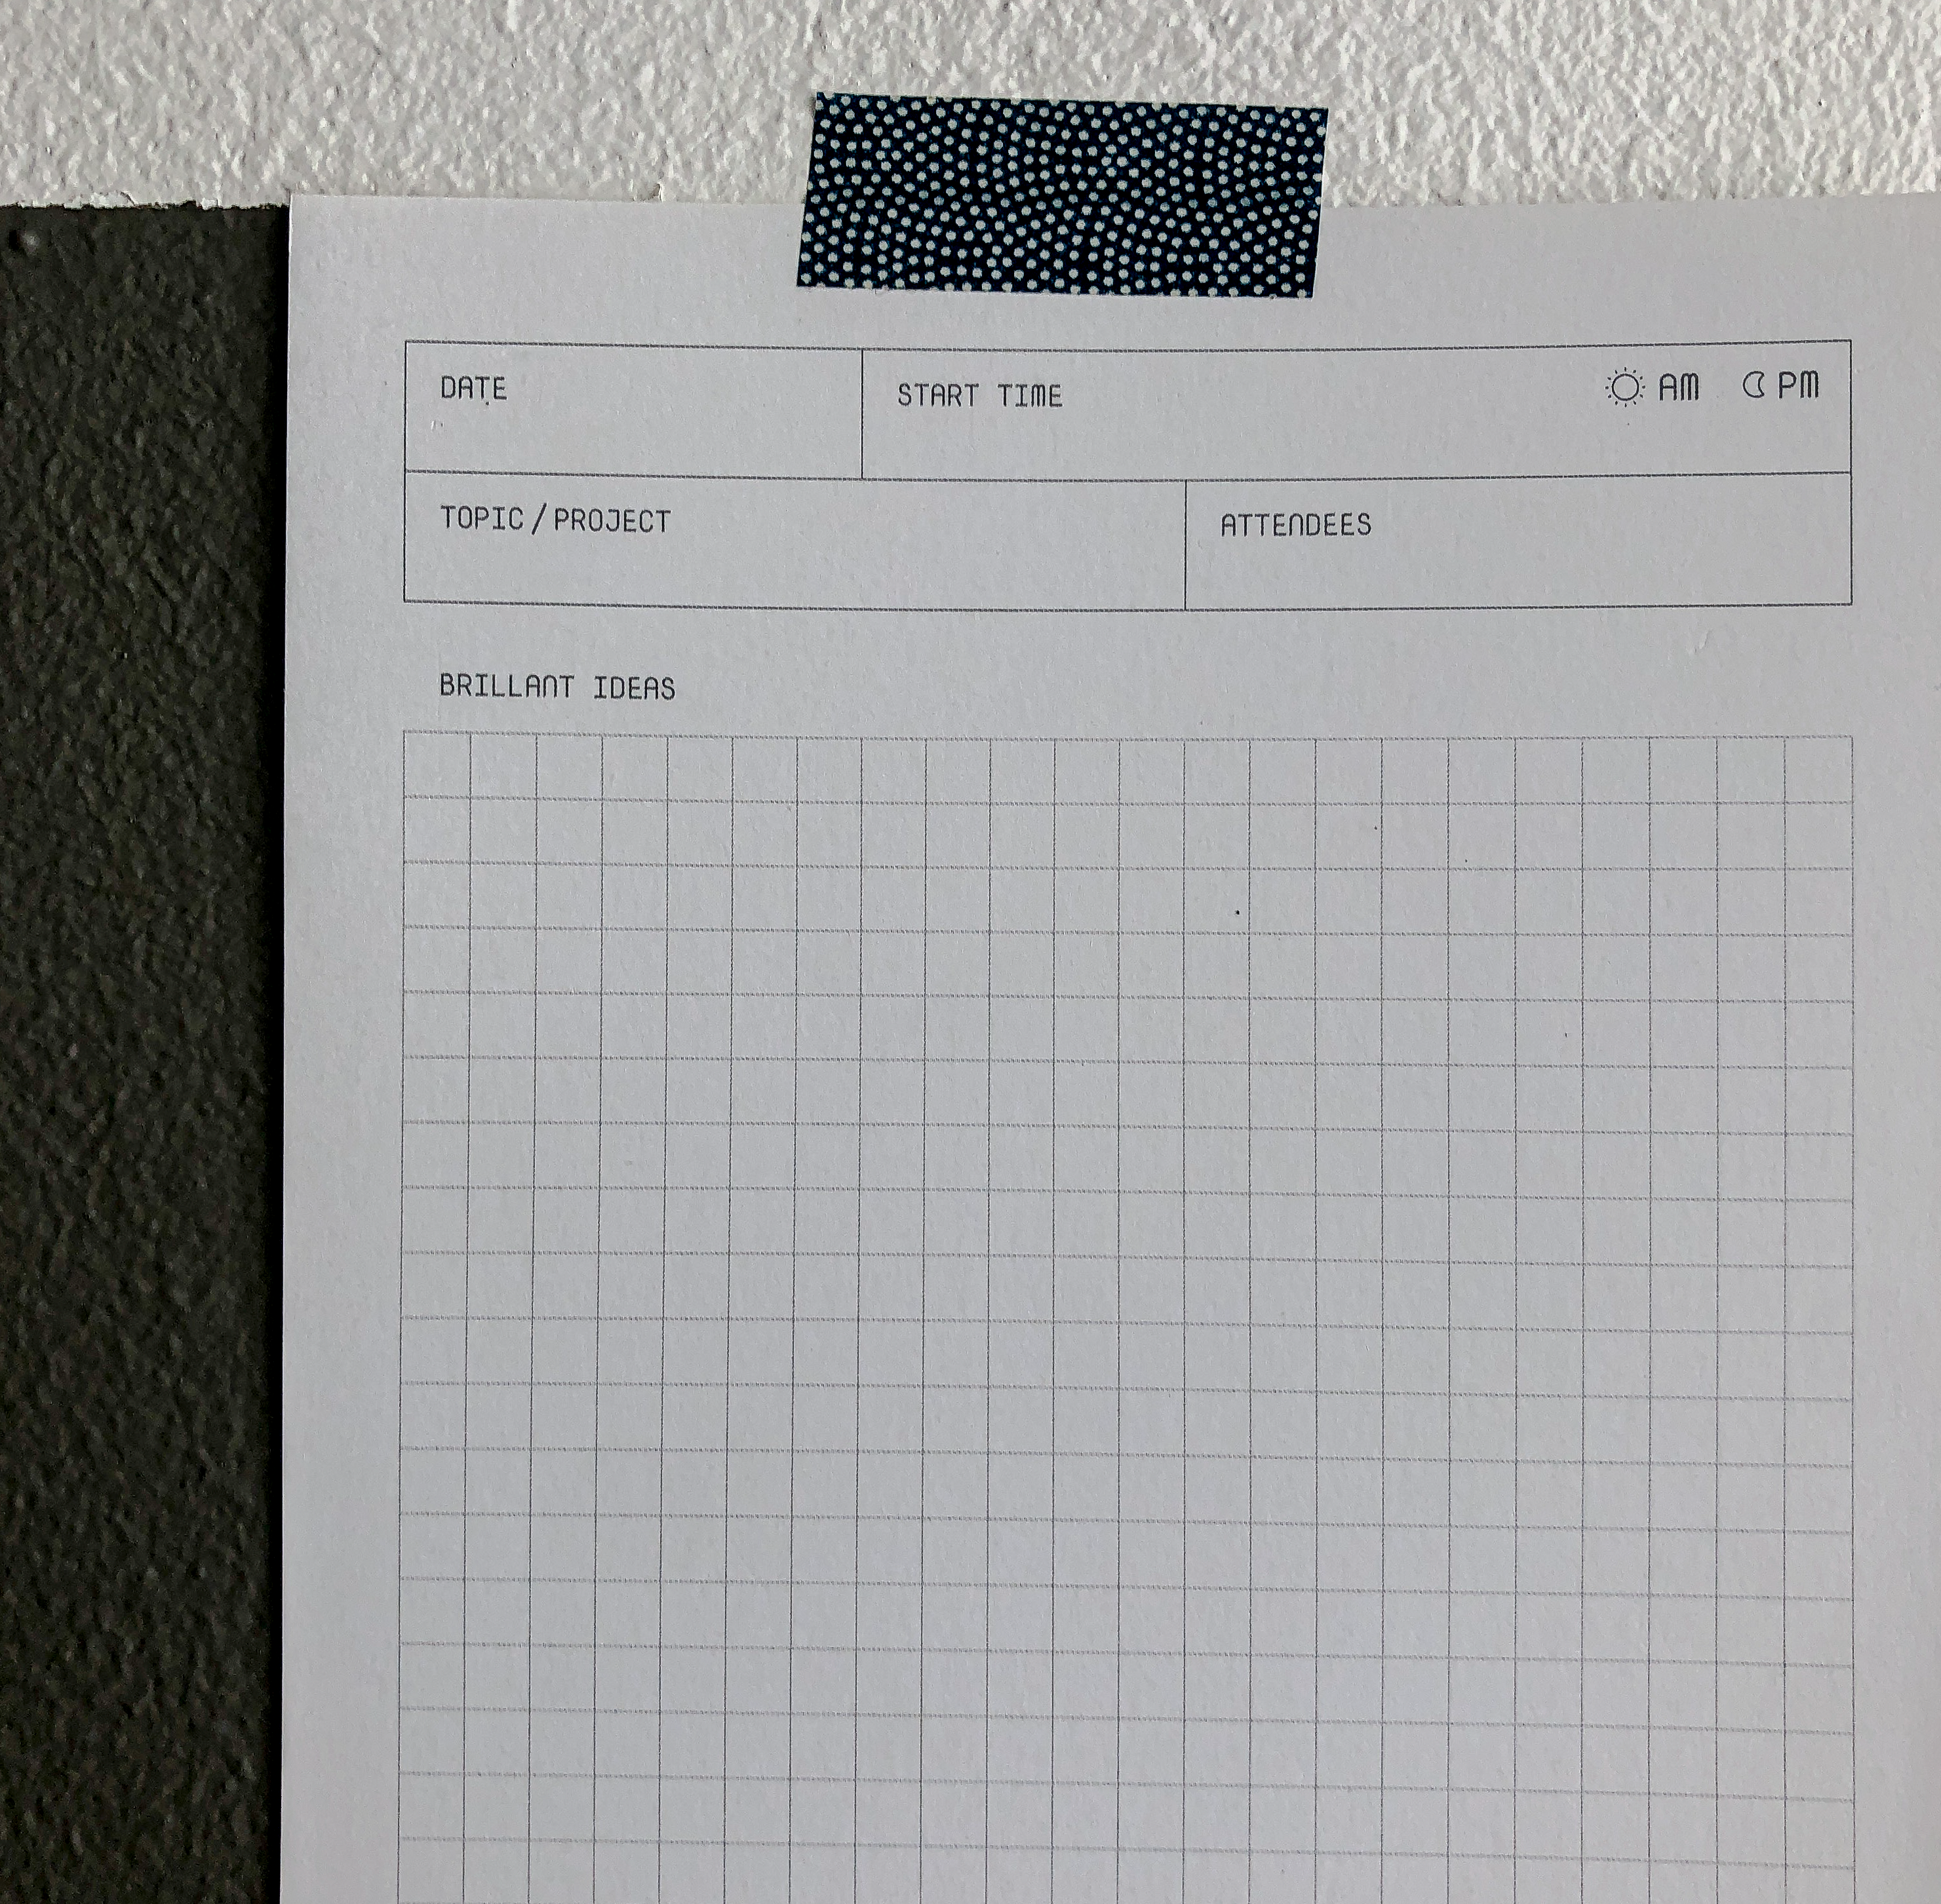 Meeting Agenda Notepad by OFFCUT